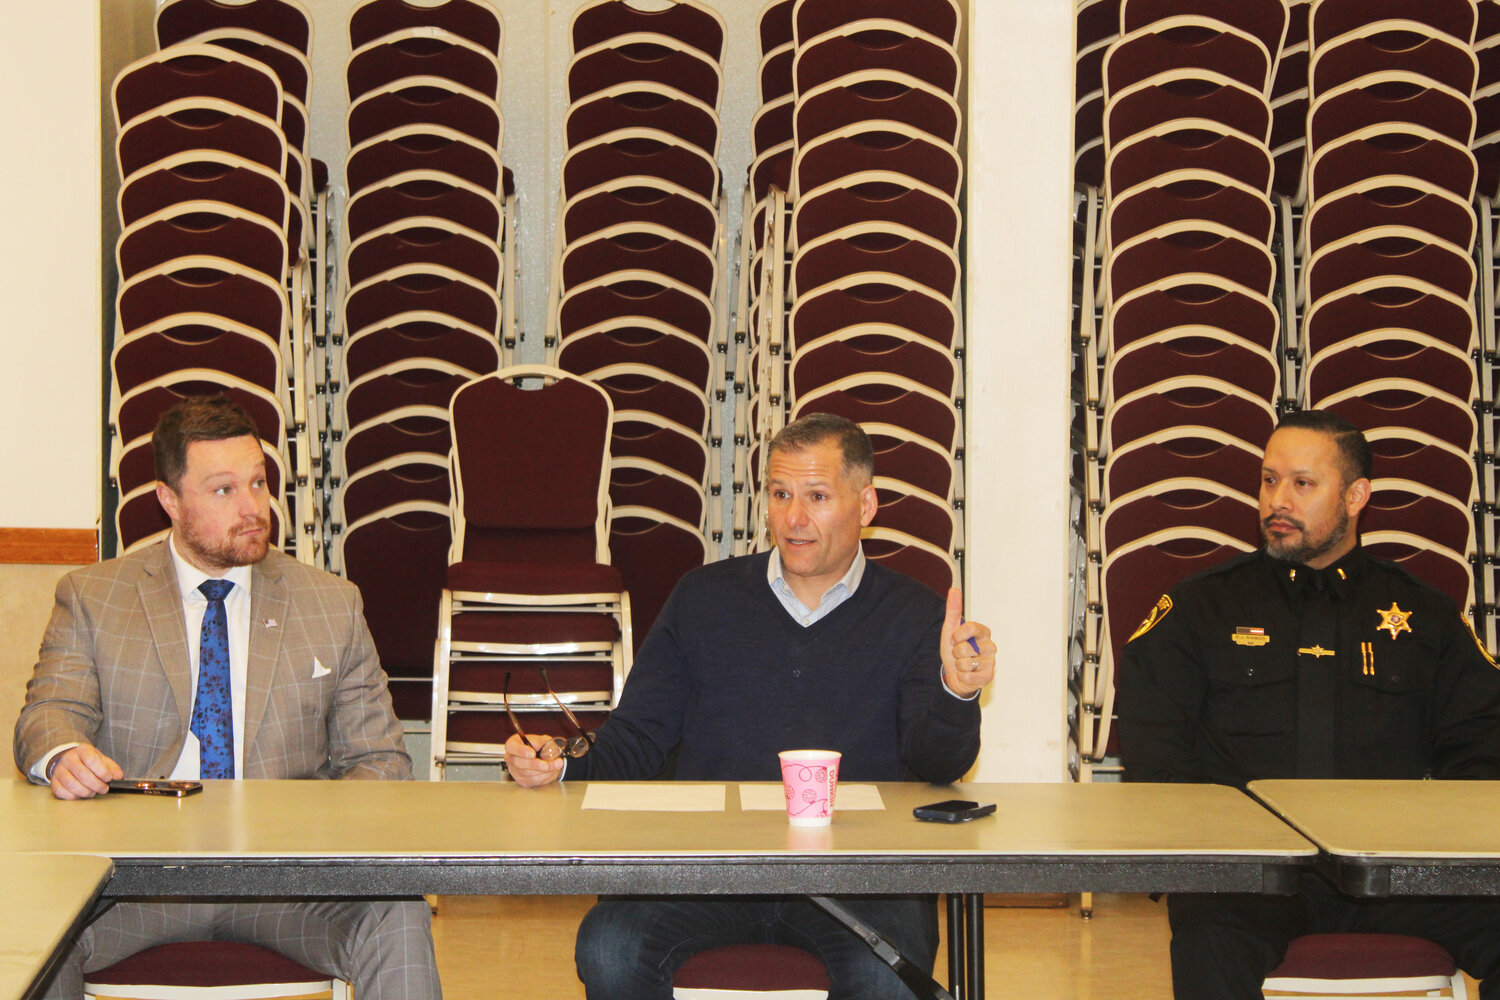 Acting District Attorney elect Brian Conaty, left, U.S. Rep. Marc Molinaro, middle, and County Sheriff’s Office Detective Peter Ramos  contributed to a roundtable discussion at the Monticello Firehouse to make talks on the possibility of establishing a crisis stabilization center for Sullivan County on Tuesday, November 21.